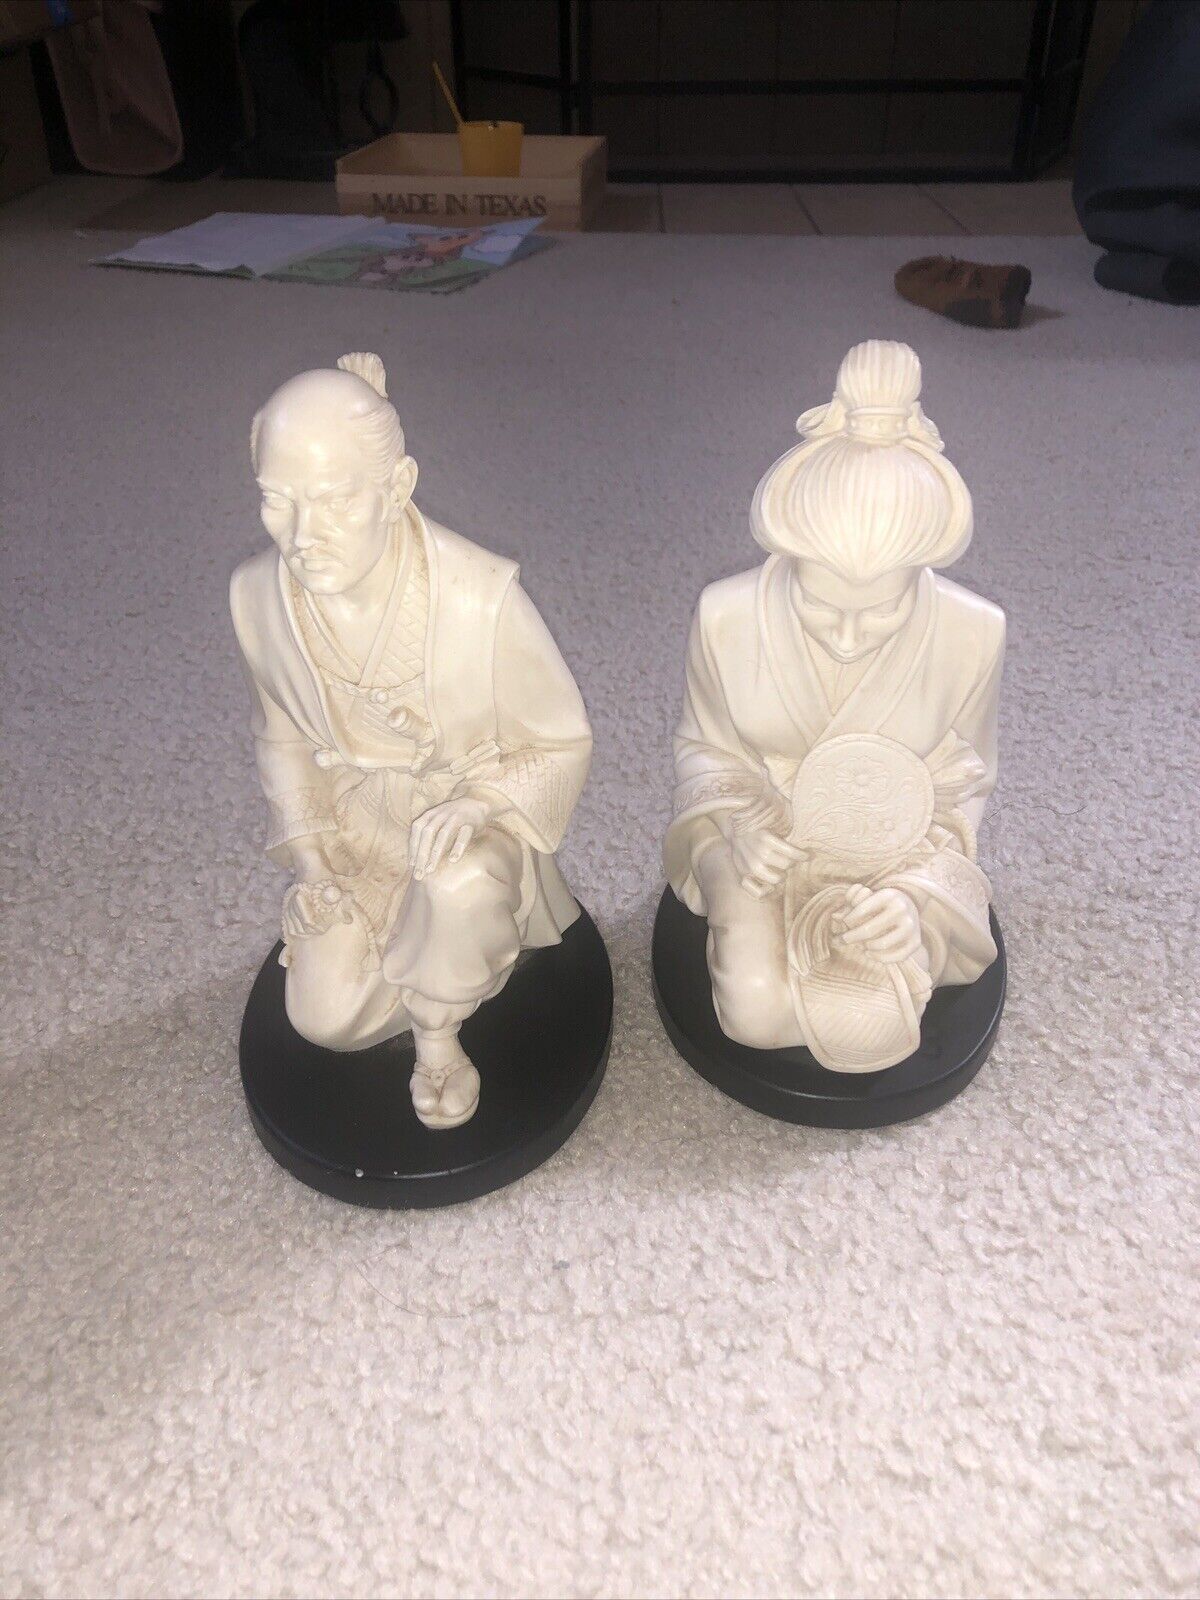 VINTAGE BEAUTIFUL JAPANESE FIGURINES MAN & WOMAN from Italy